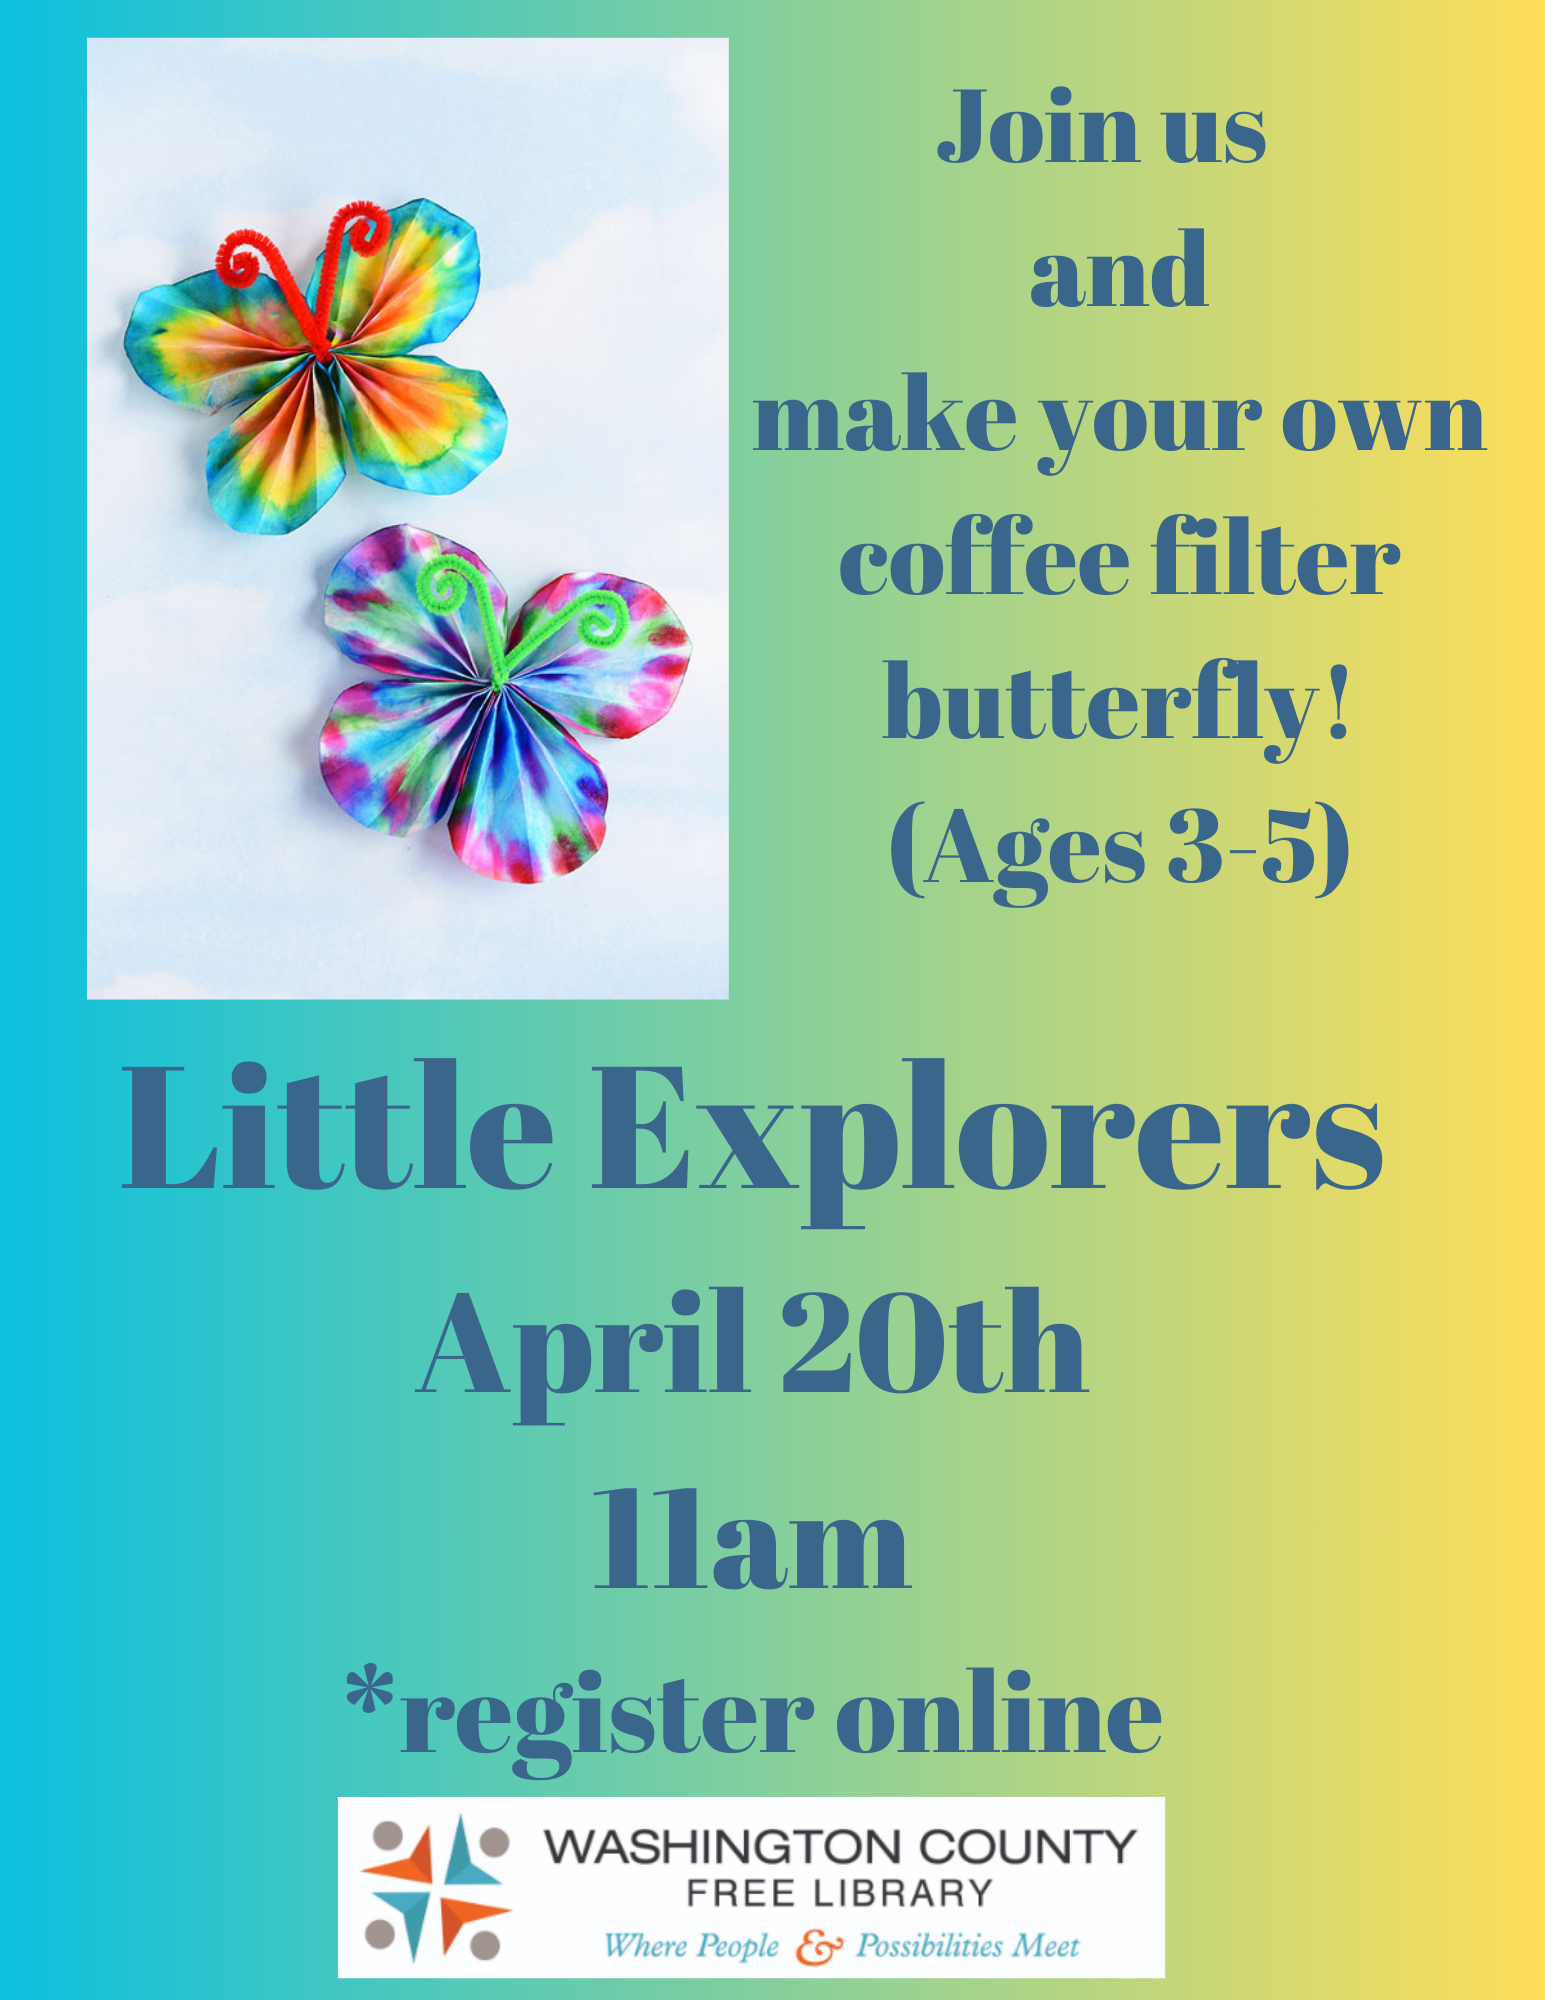 Little Explorers: Butterfly Creations